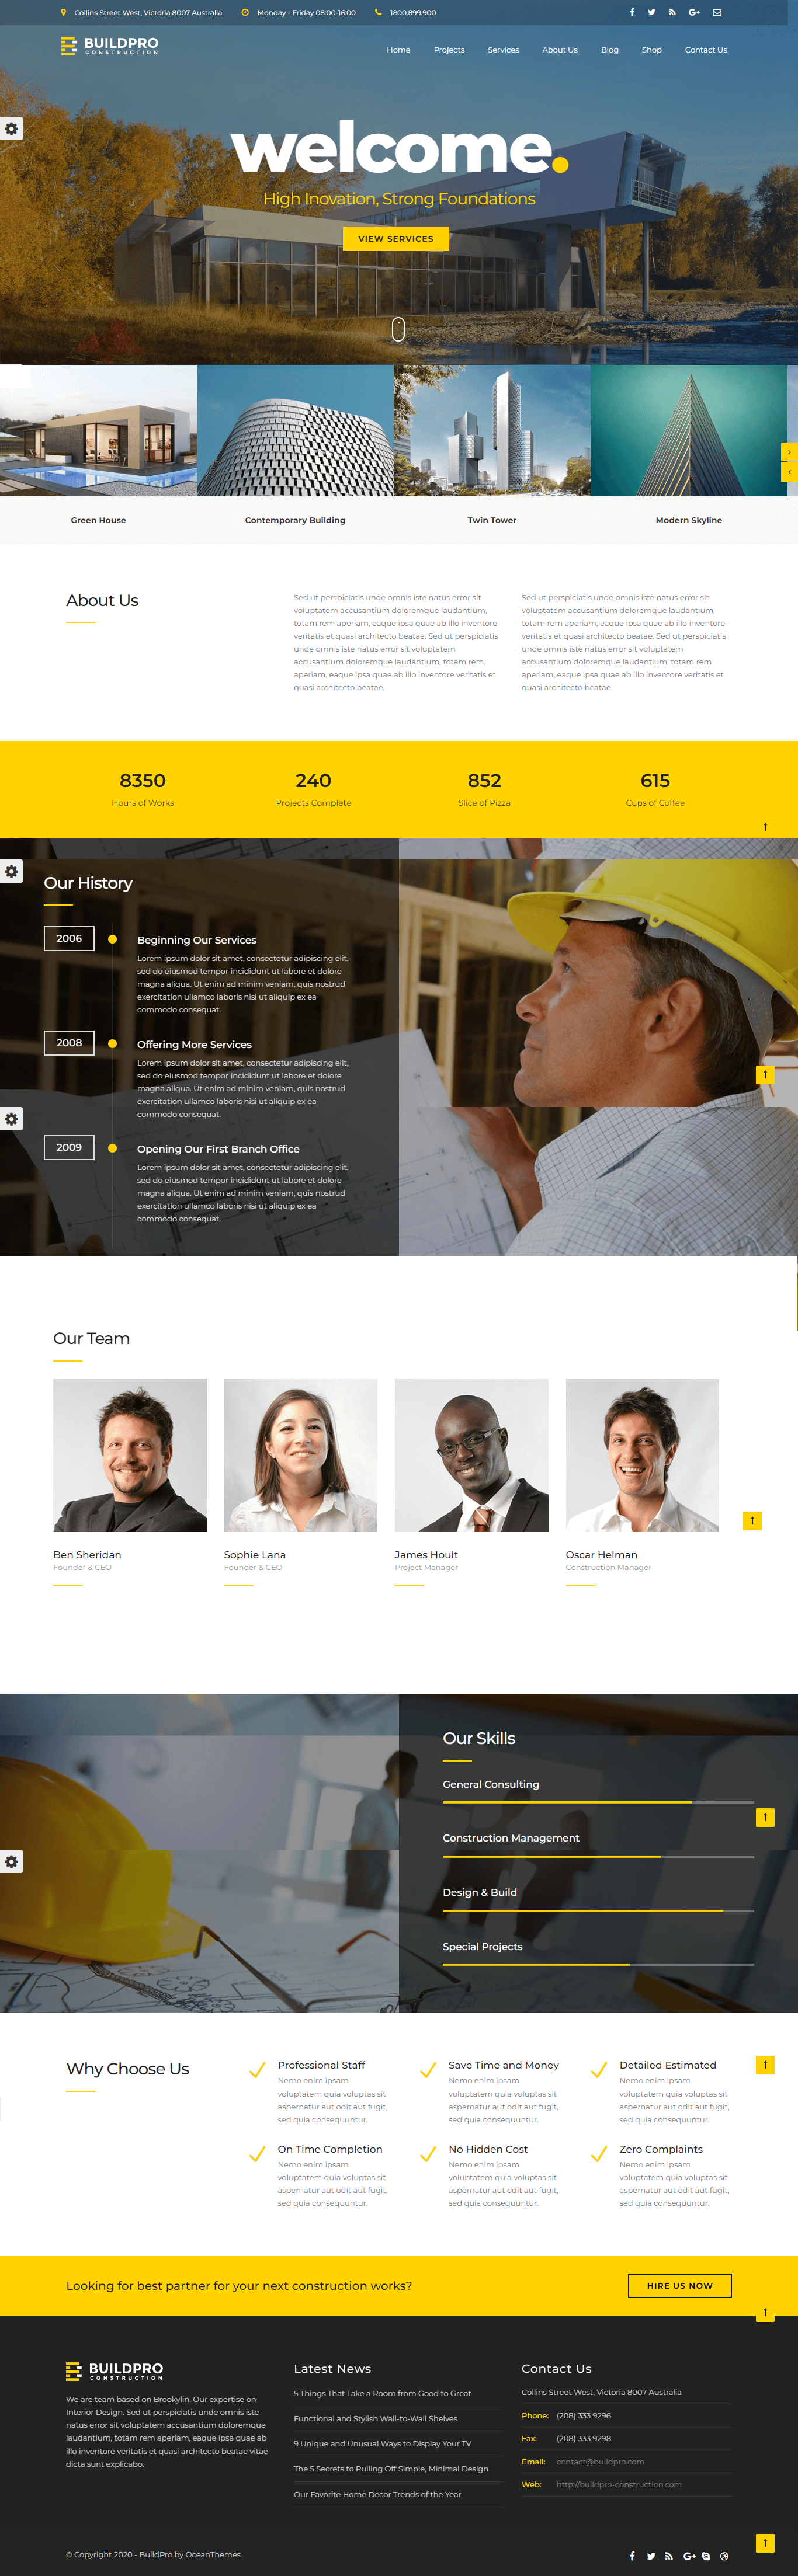 buildpro home